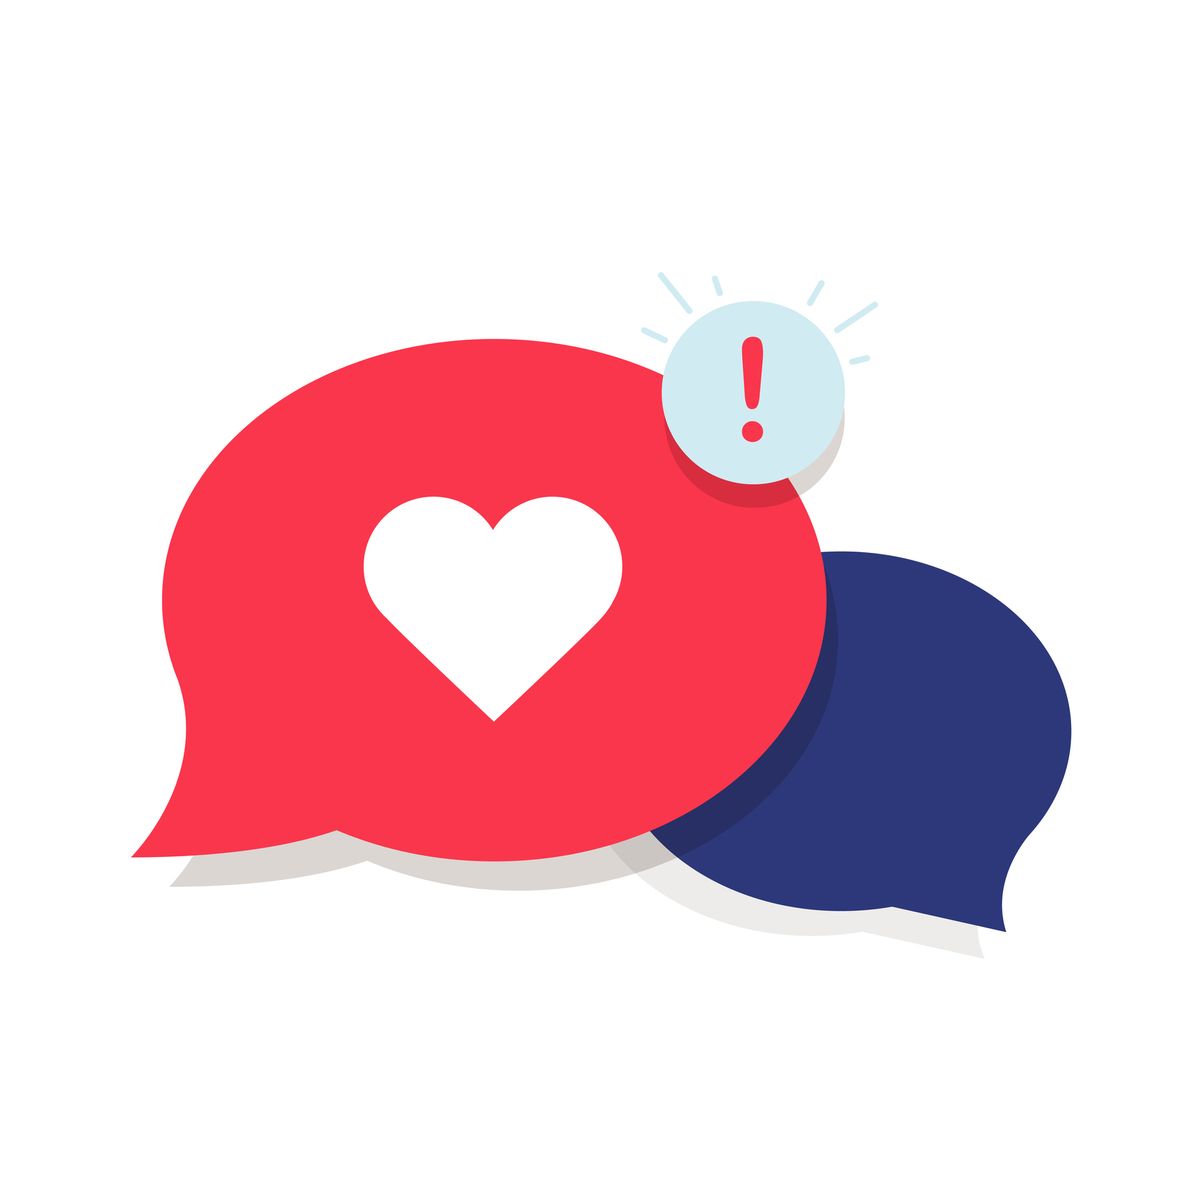 brand ambassador chat speech bubble icon and influencer marketing representative love chat or client oriented symbol concept cloud with heart and awarness sign long distance relationships